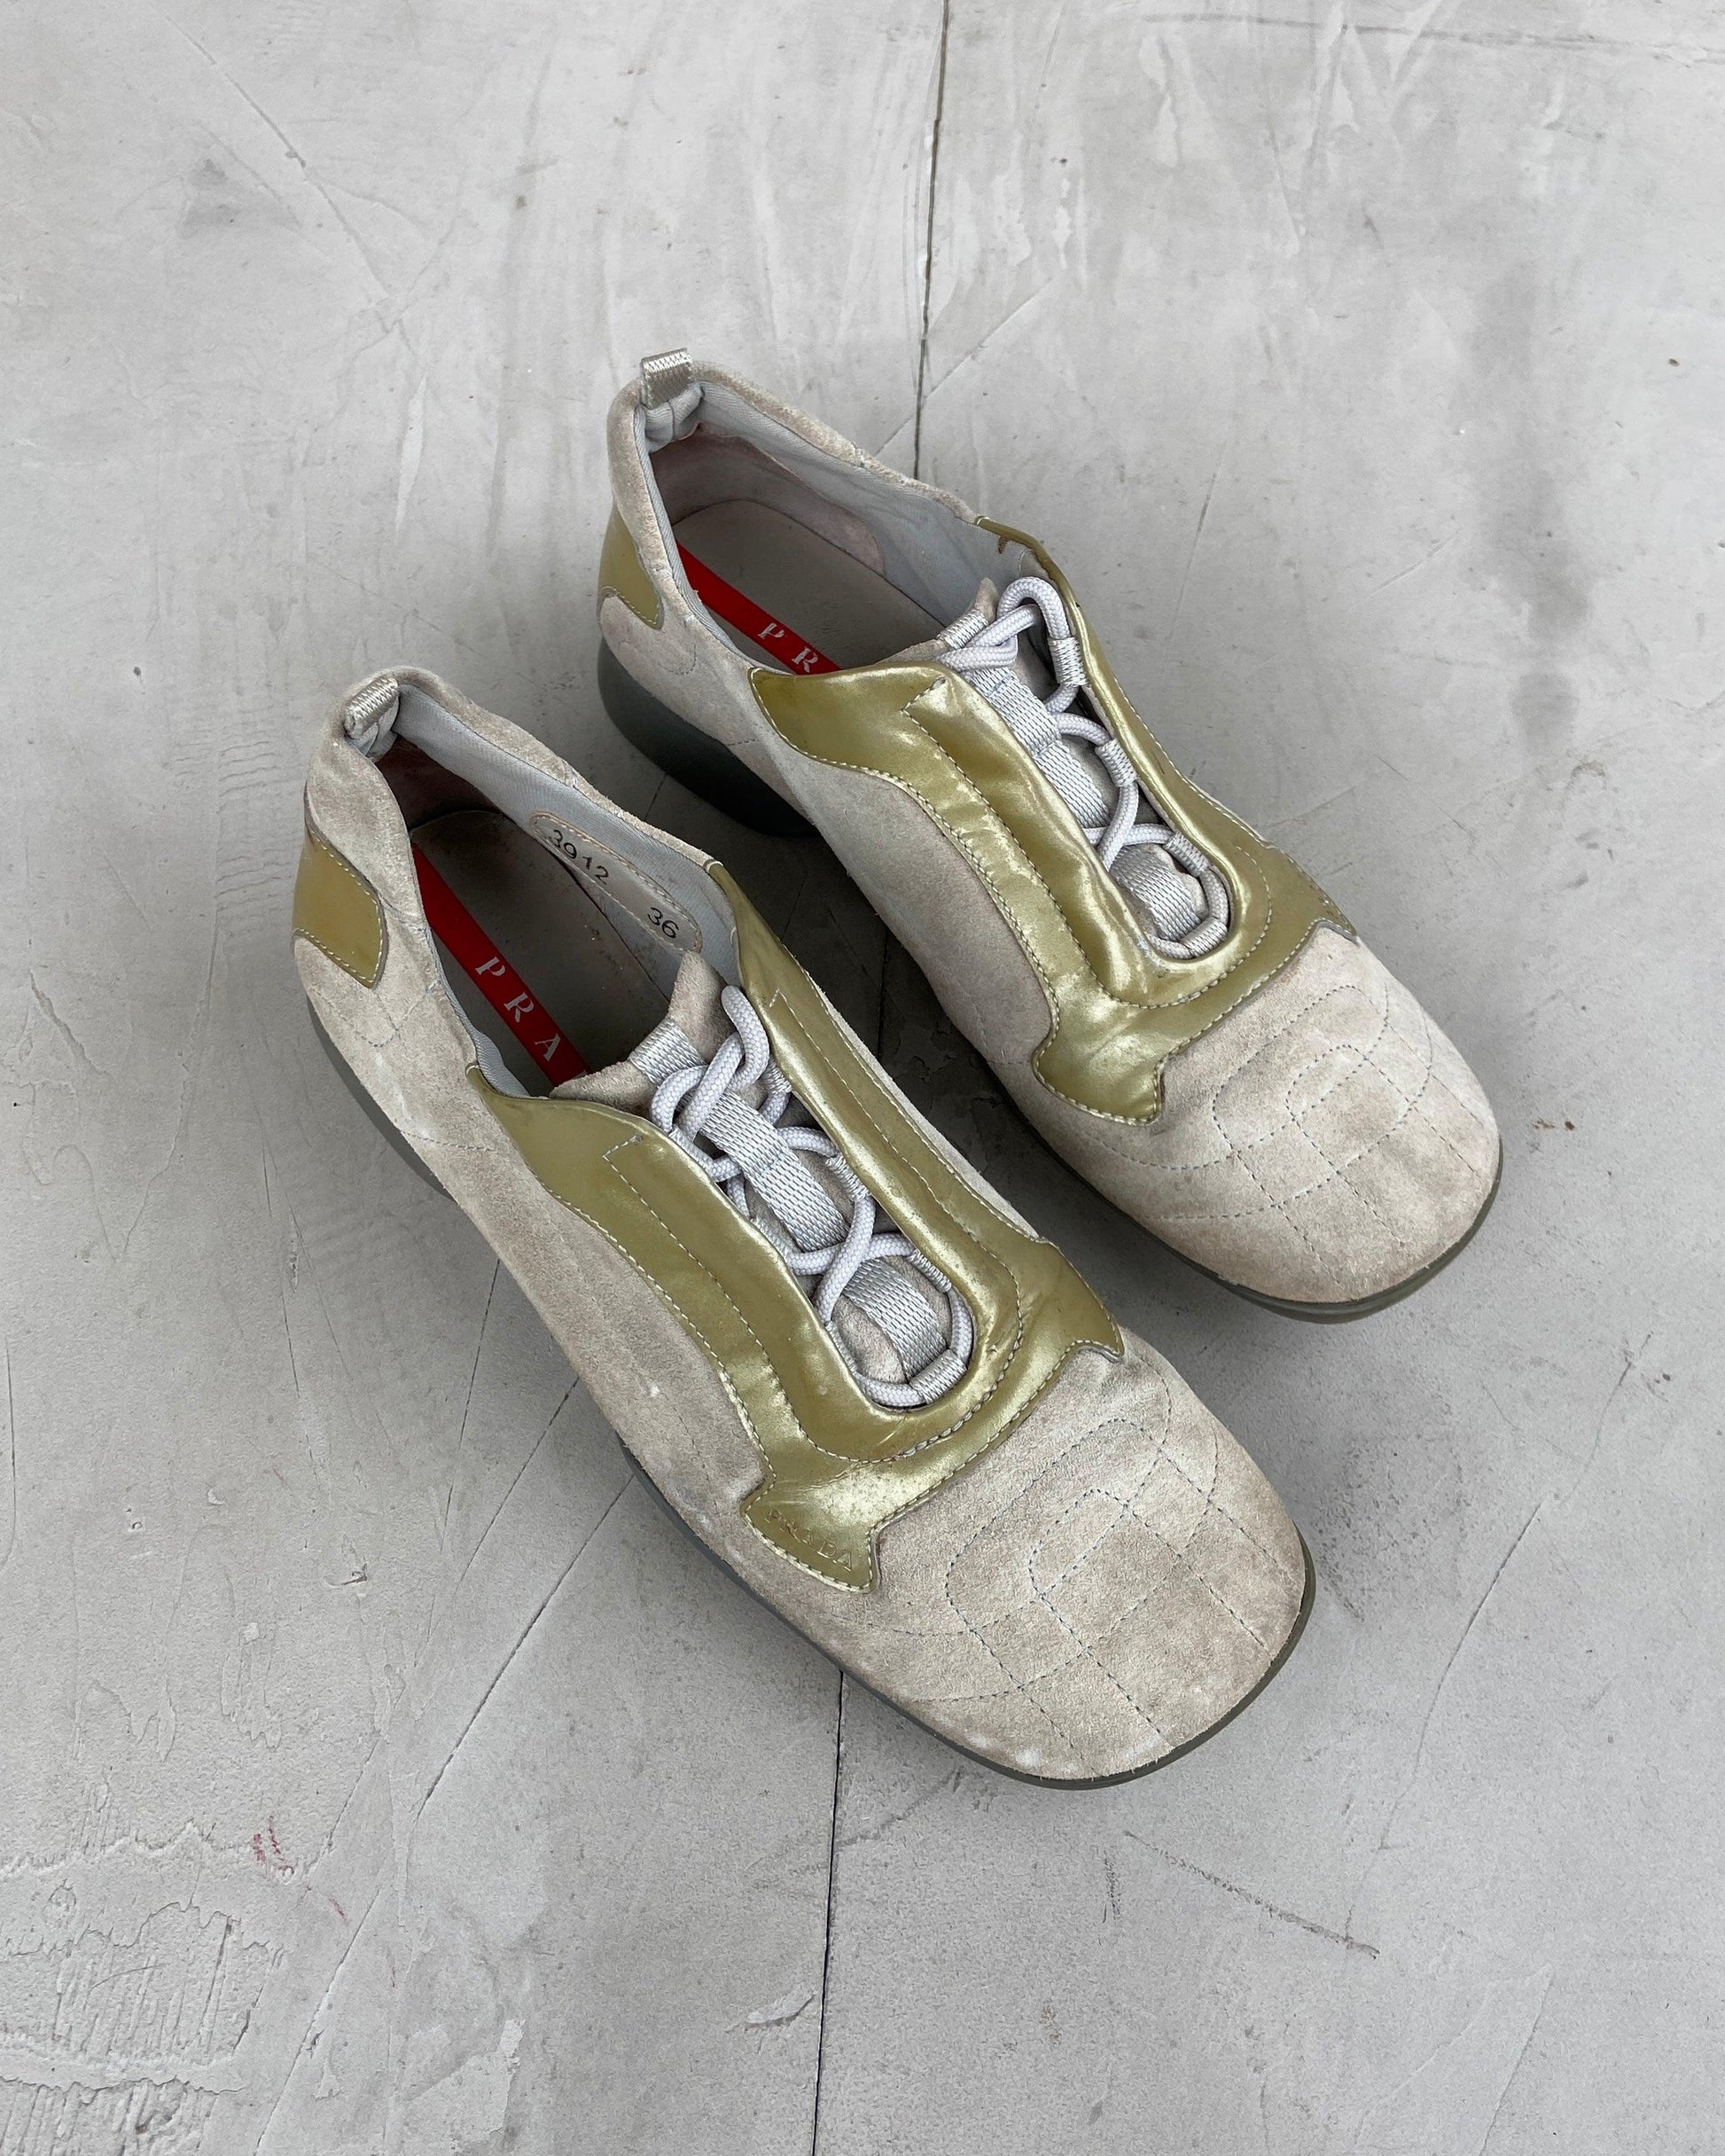 PRADA SPORT SUEDE & PATENT LEATHER TRAINERS - EU 36 - Known Source